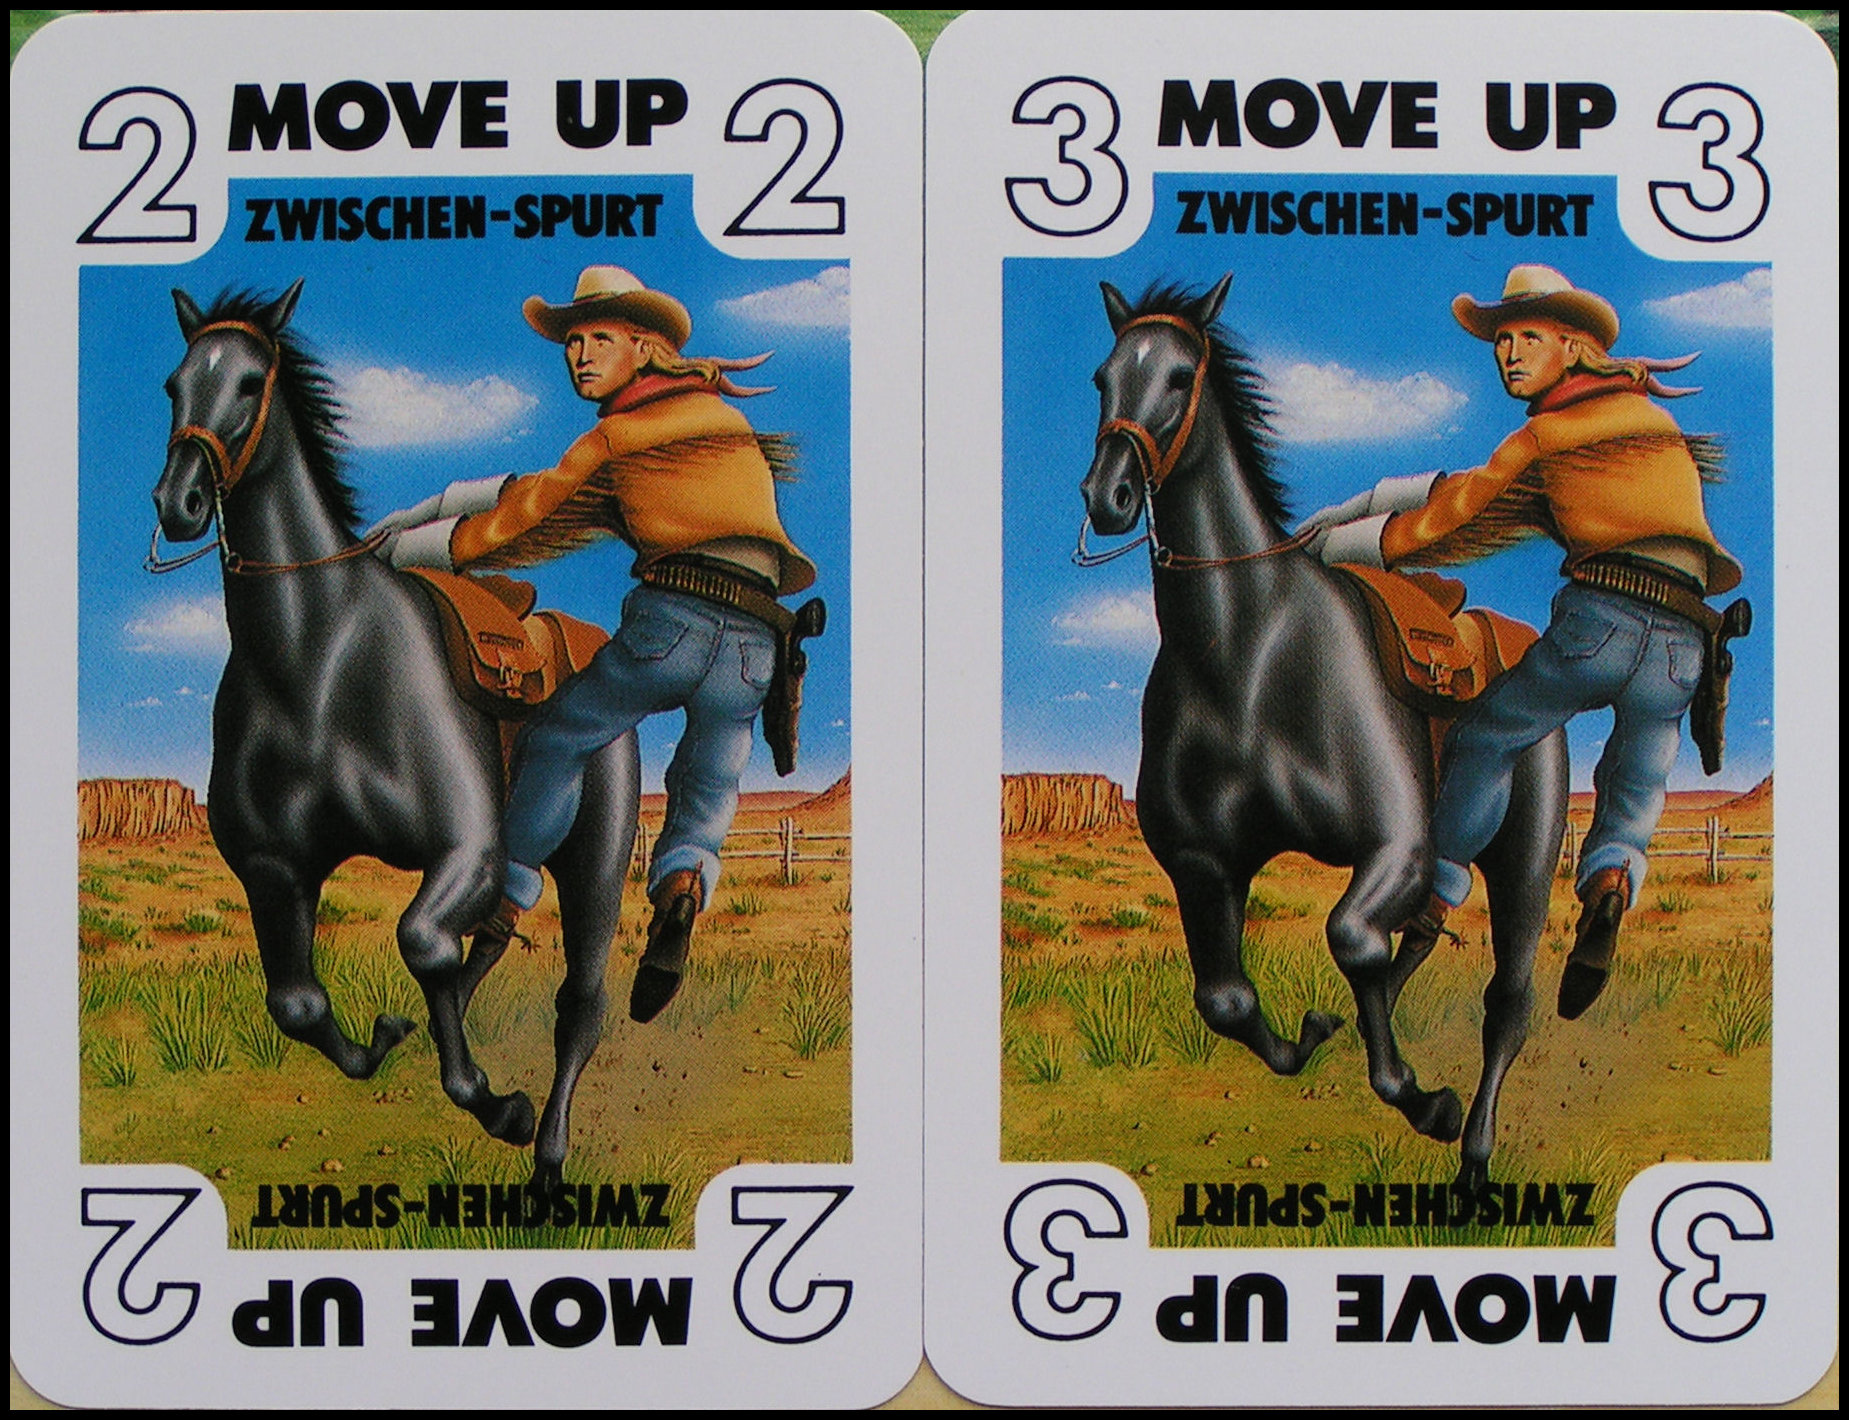 Pony Express - The Two Move Up Cards